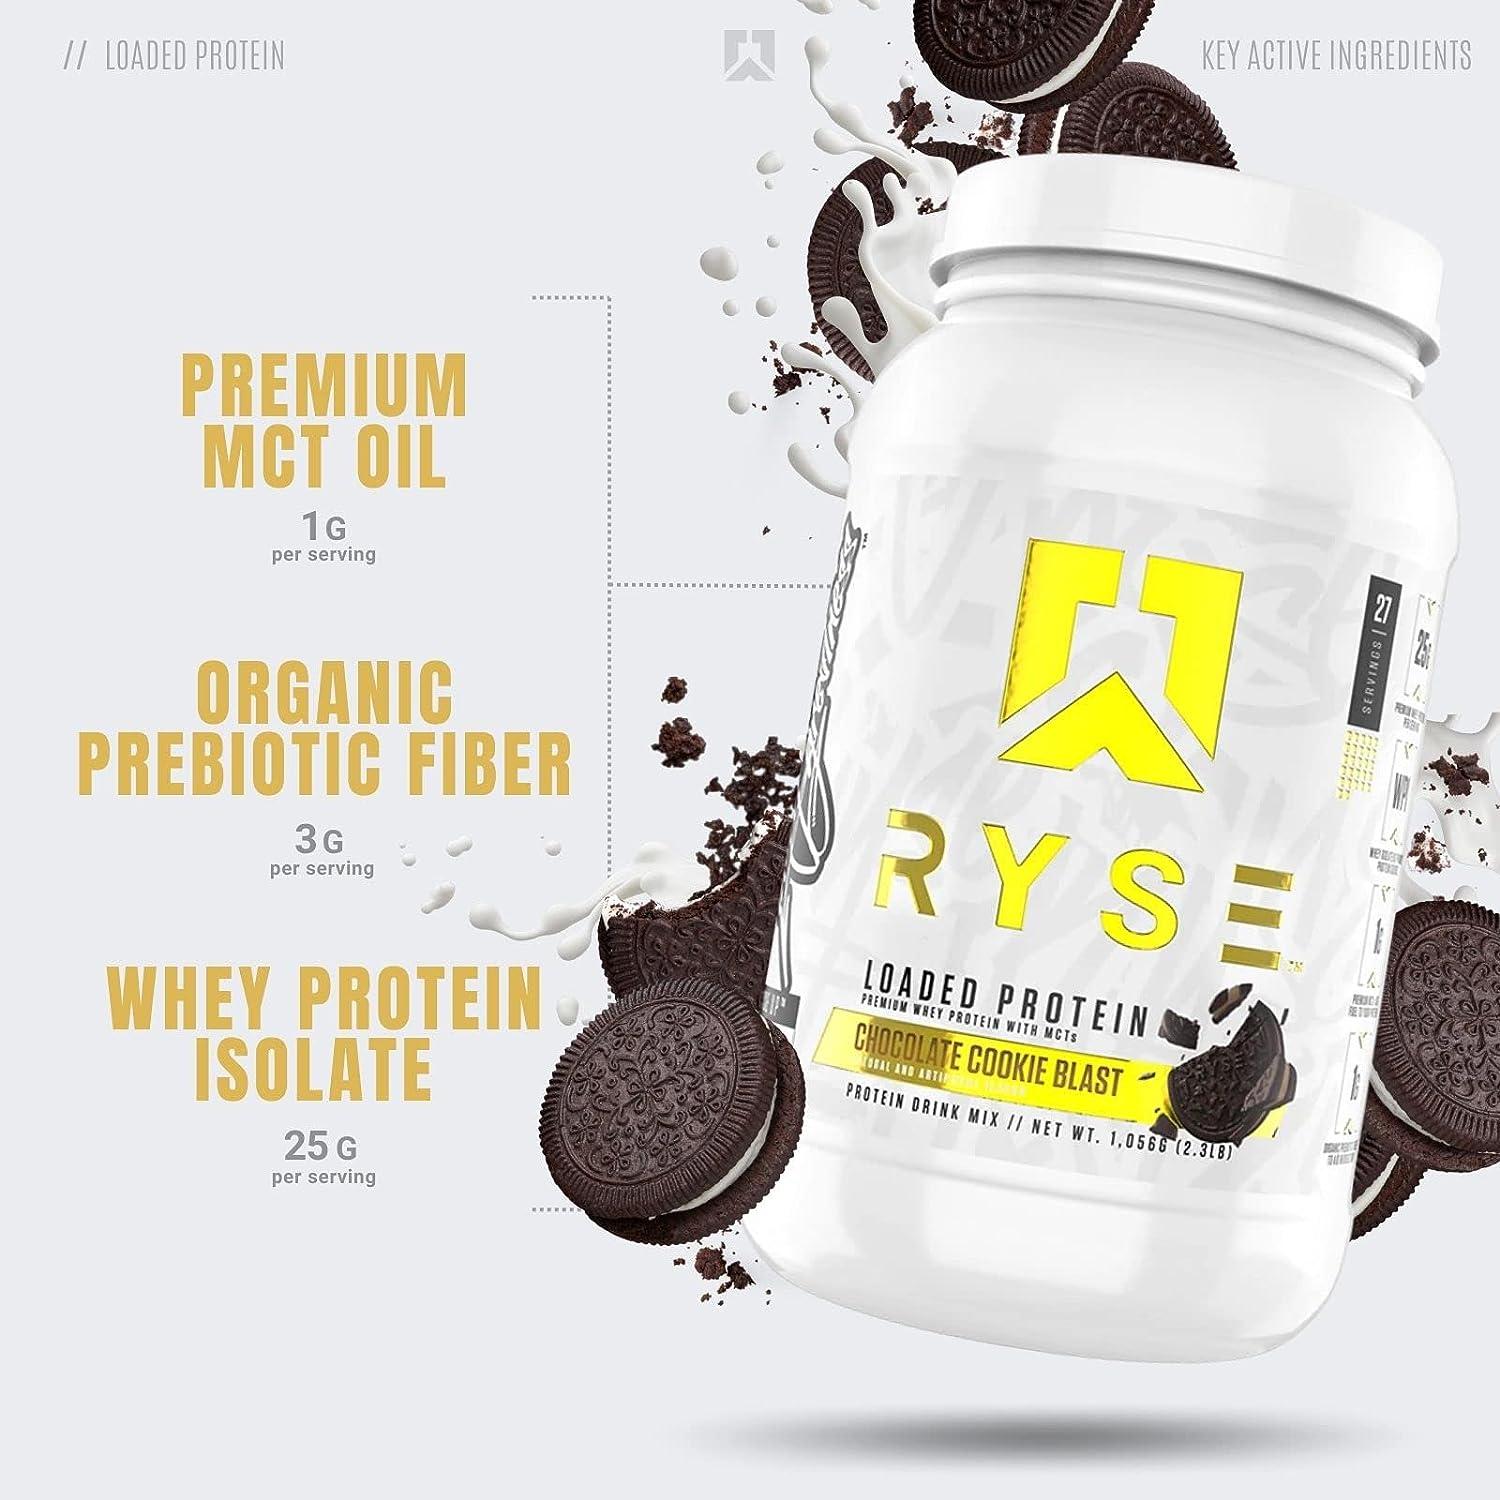 Loaded Protein  RYSE Supplements